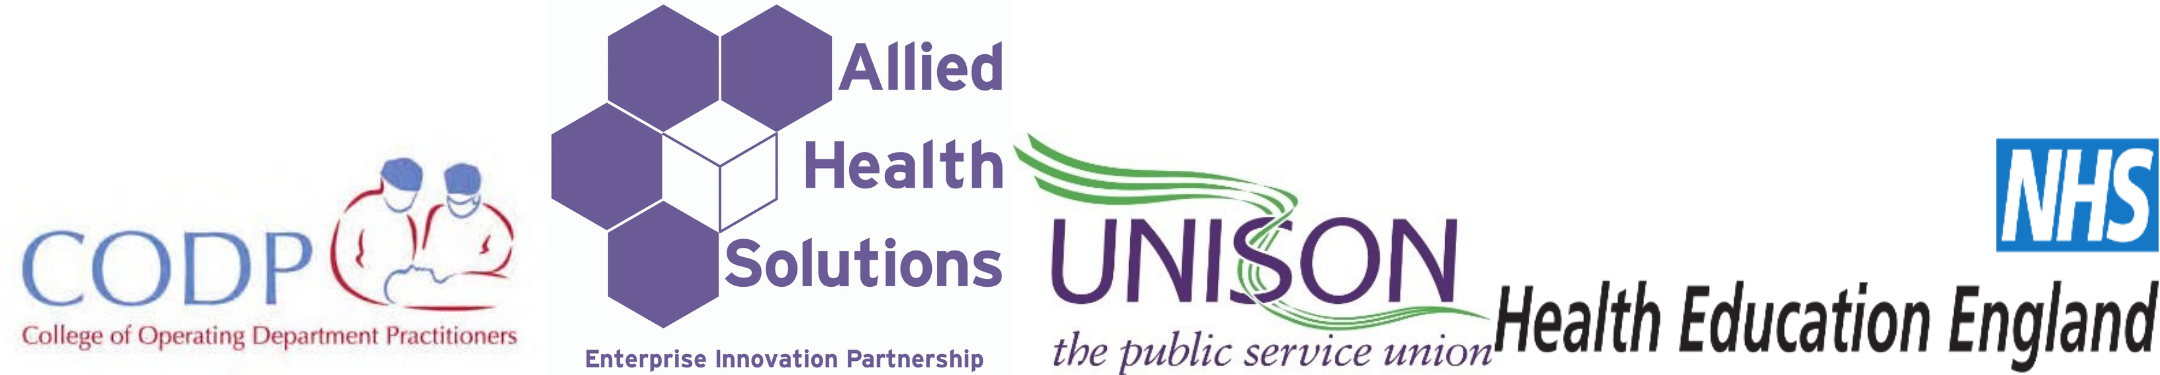 CODP, Allied Health Solutions, UNISON, and HEE logos